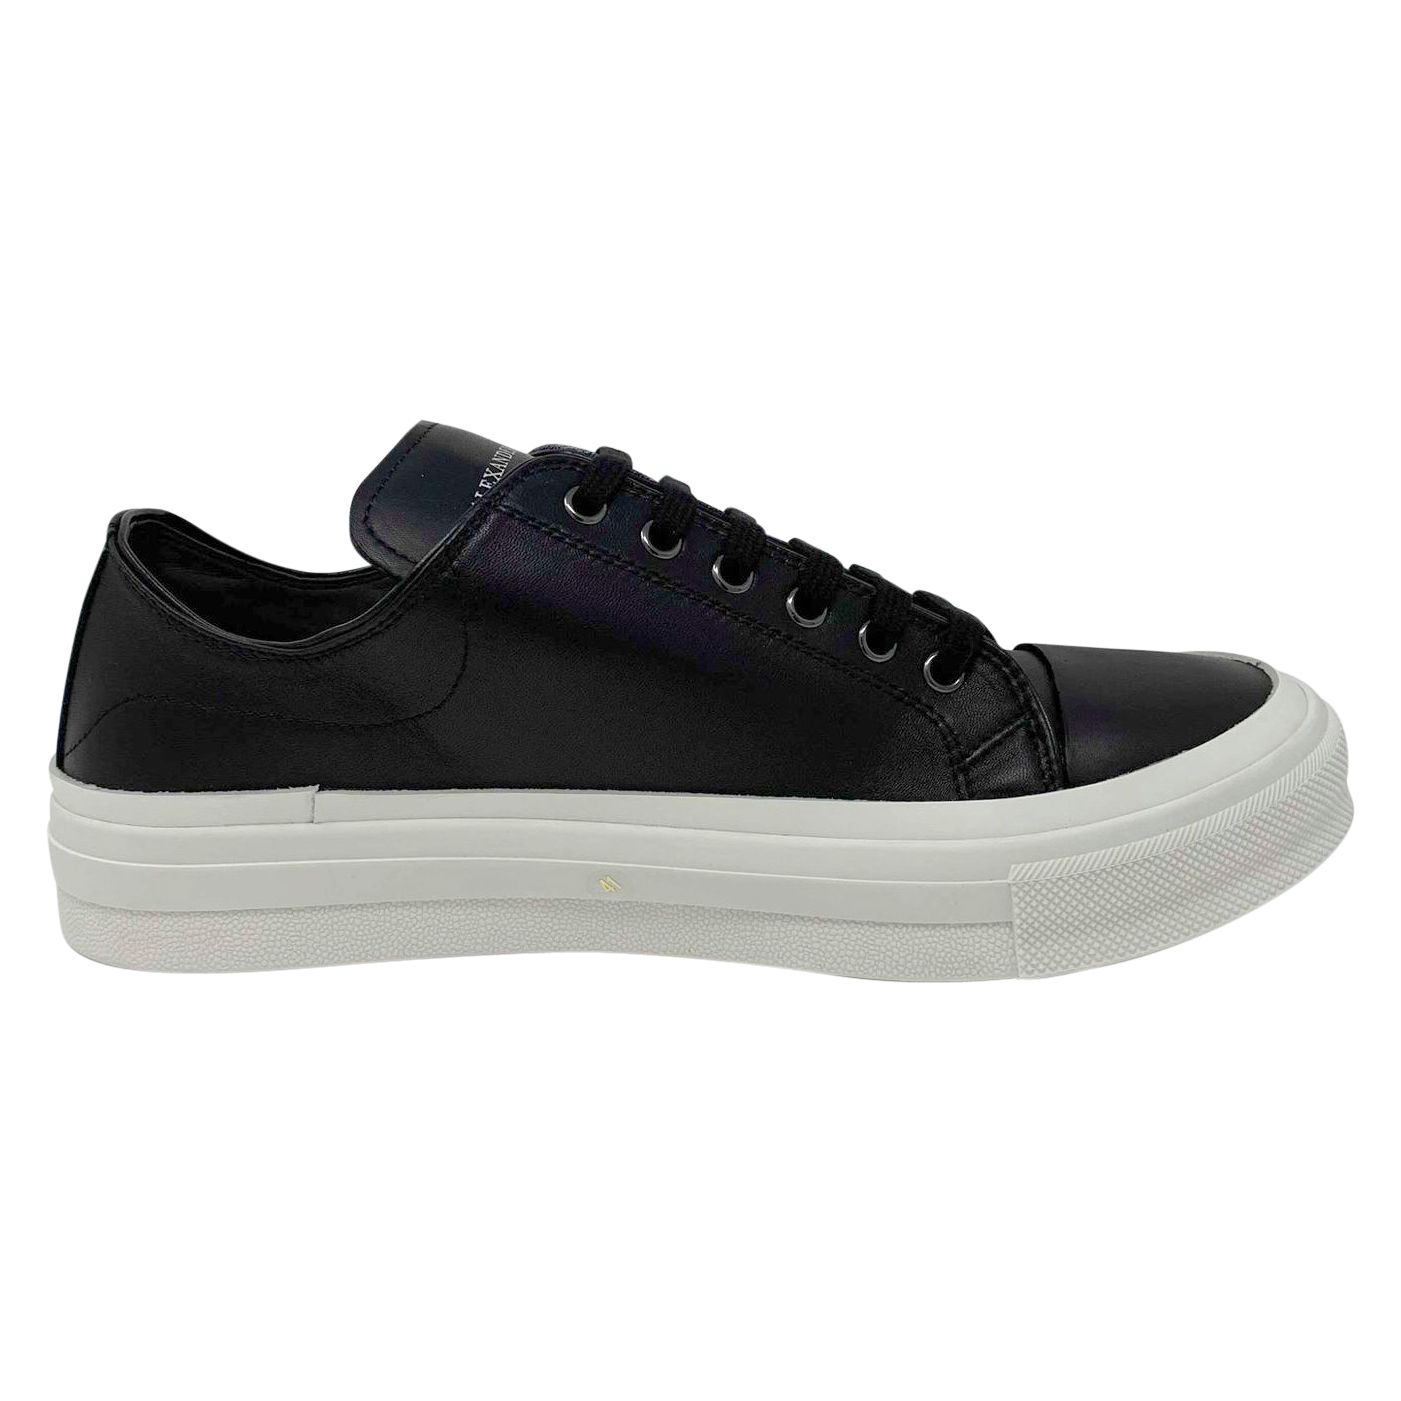 Alexander McQueen 526212 WHRUK 1049 Trainers. Brand on tongue. Skull and contrast print. Stitched detail. Rubber sole. 100% Calfskin leather, Made In Italy